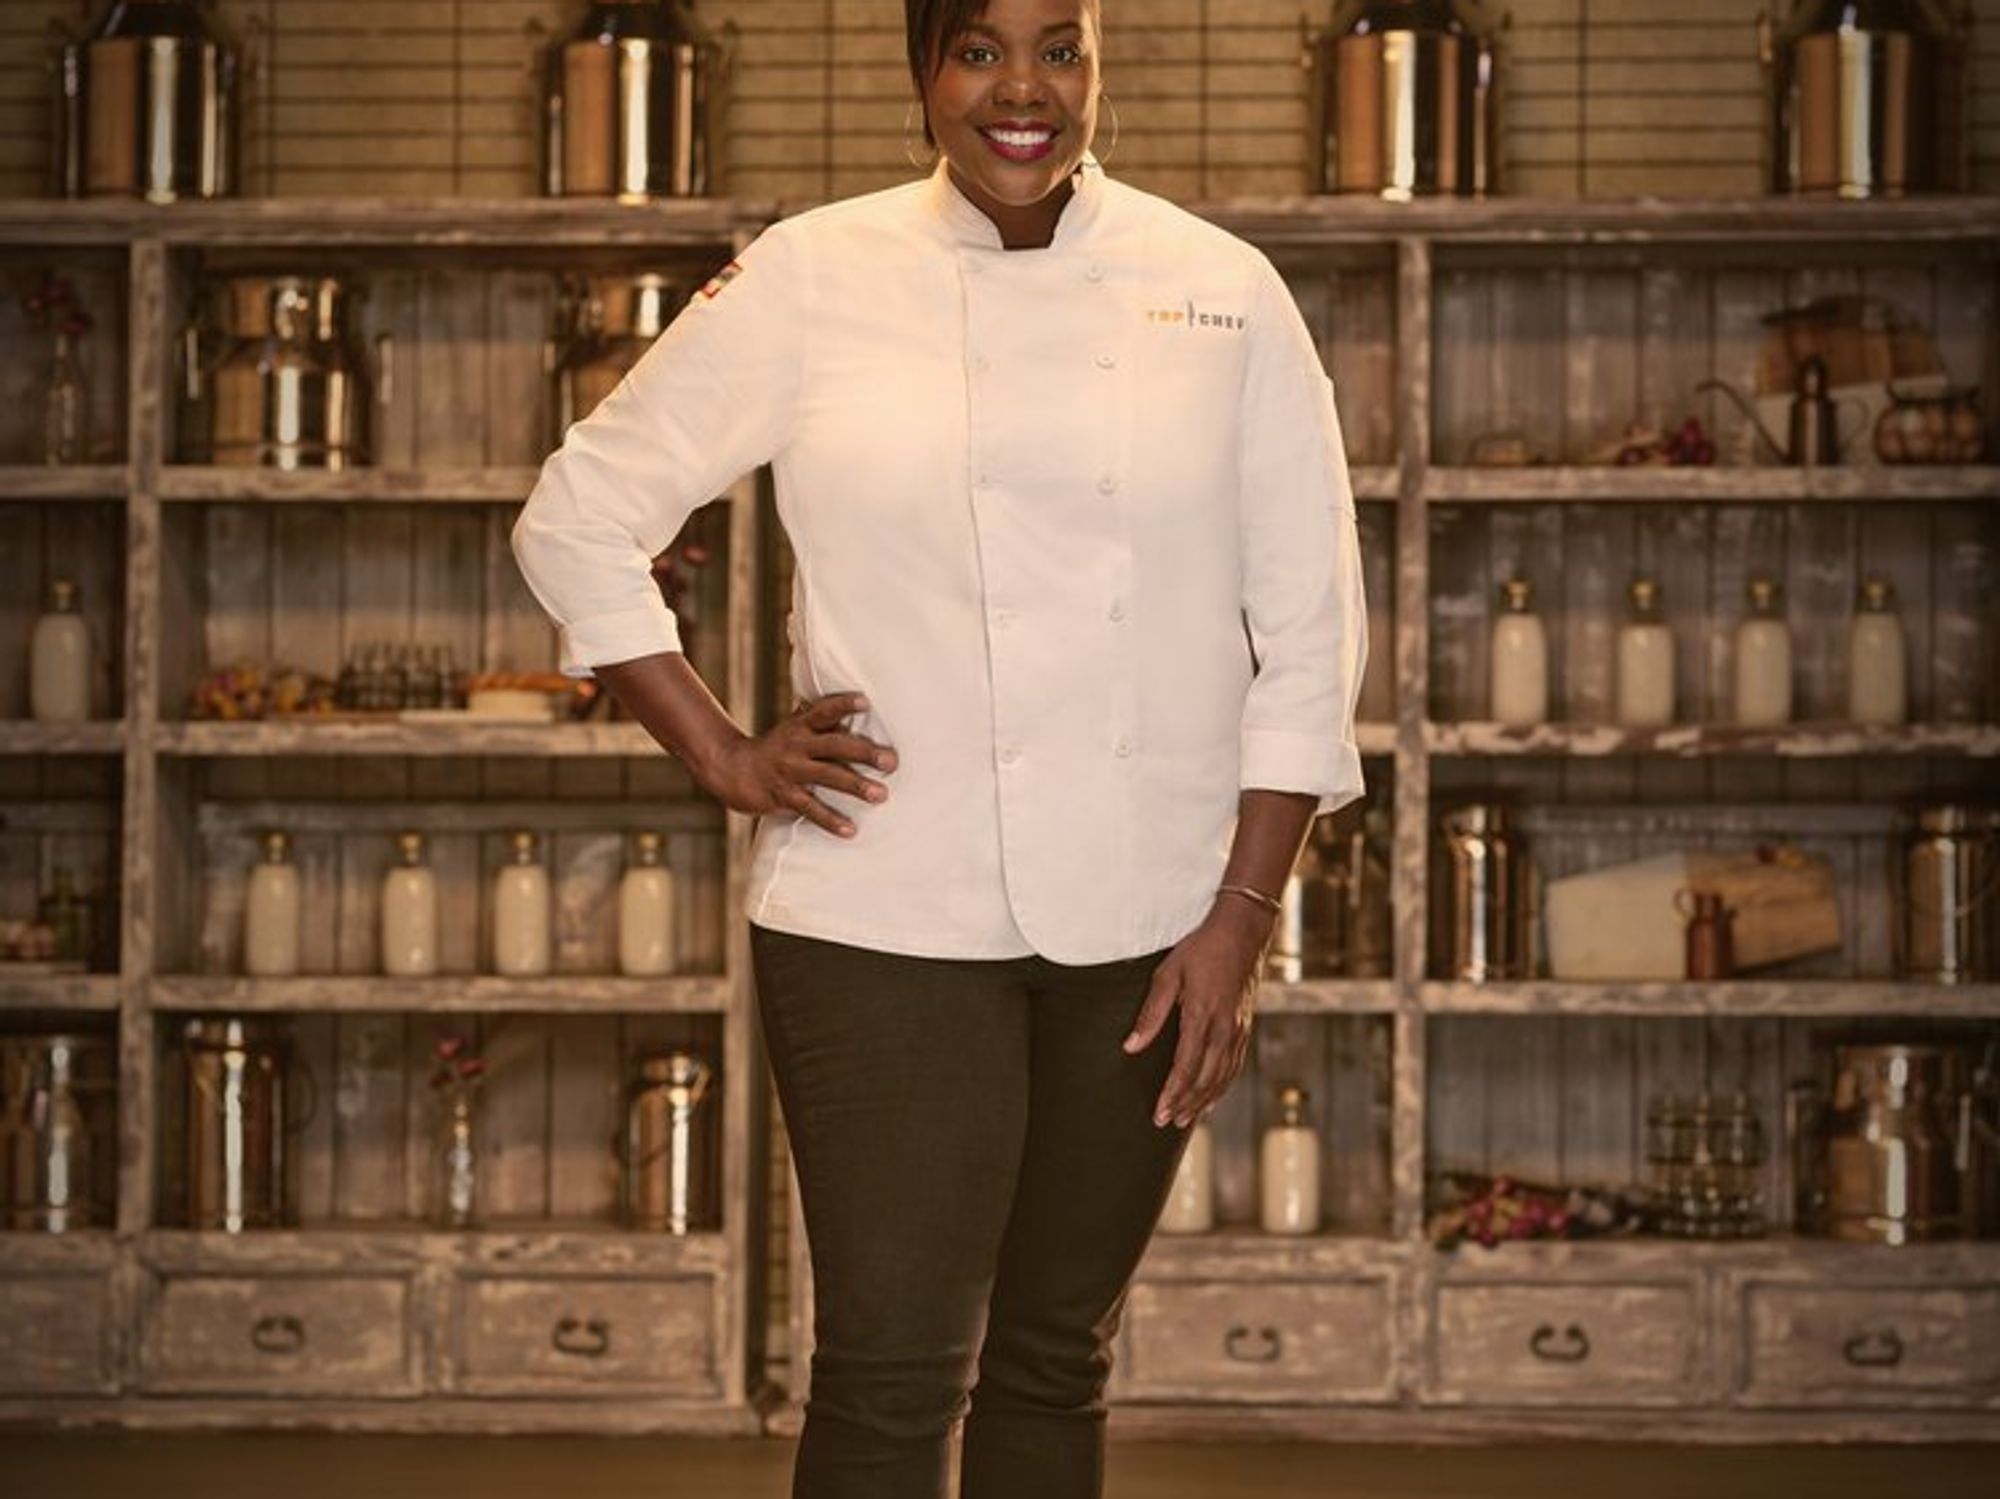 Top Chef Milwaukee Michelle Wallace